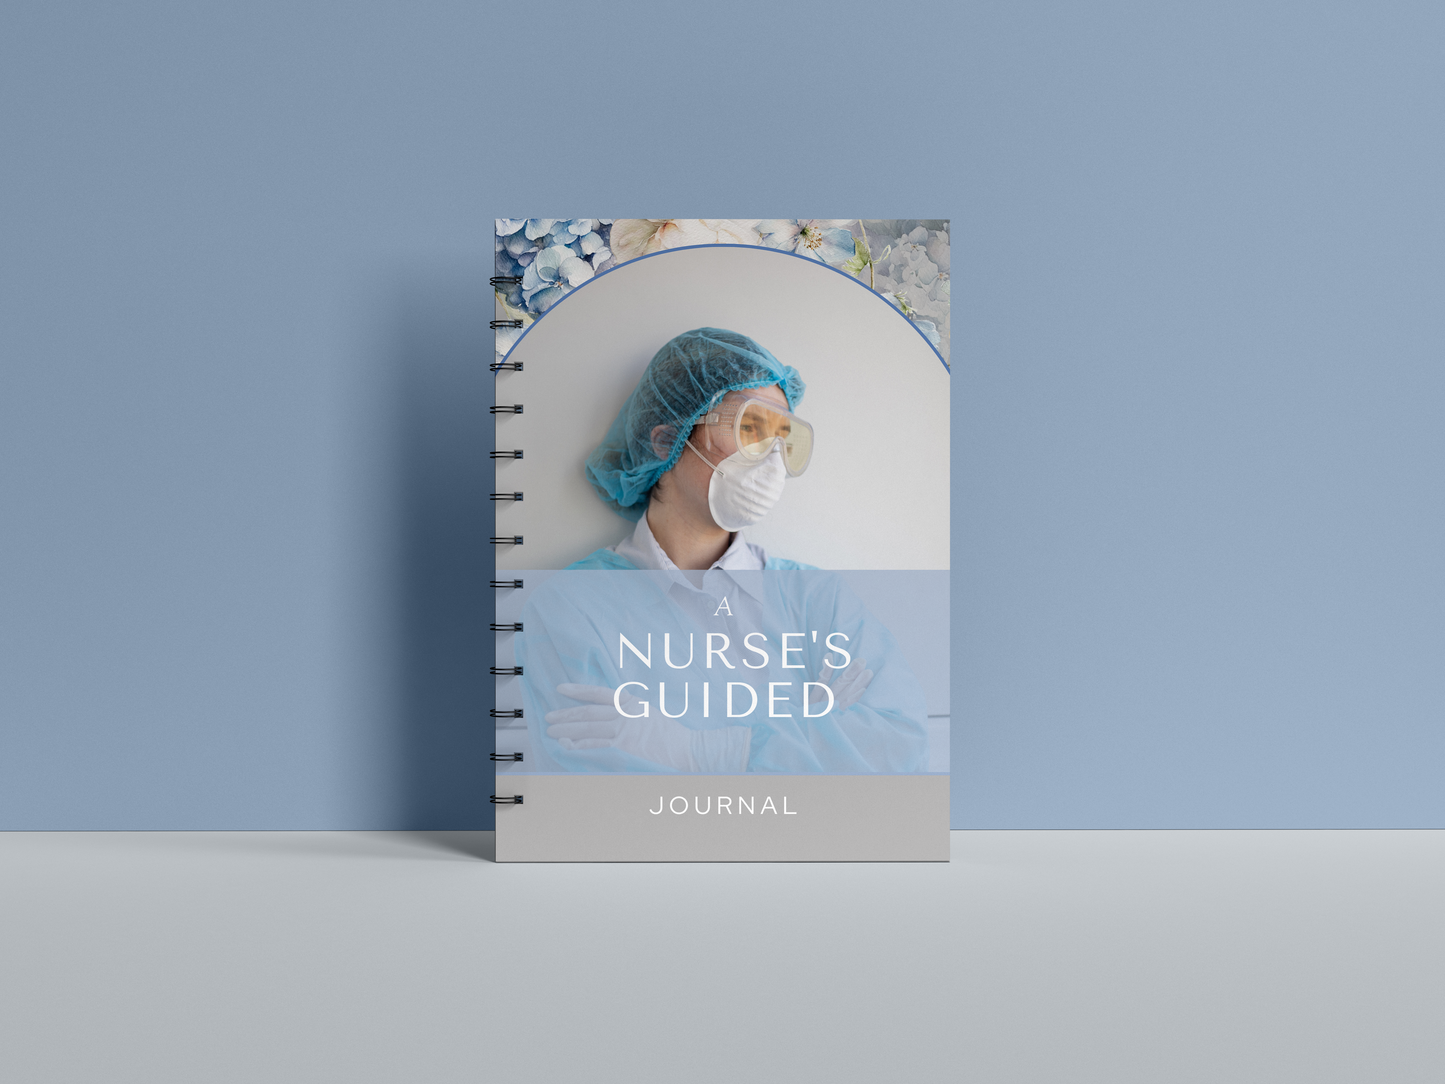 A Nurse's Guided Journal